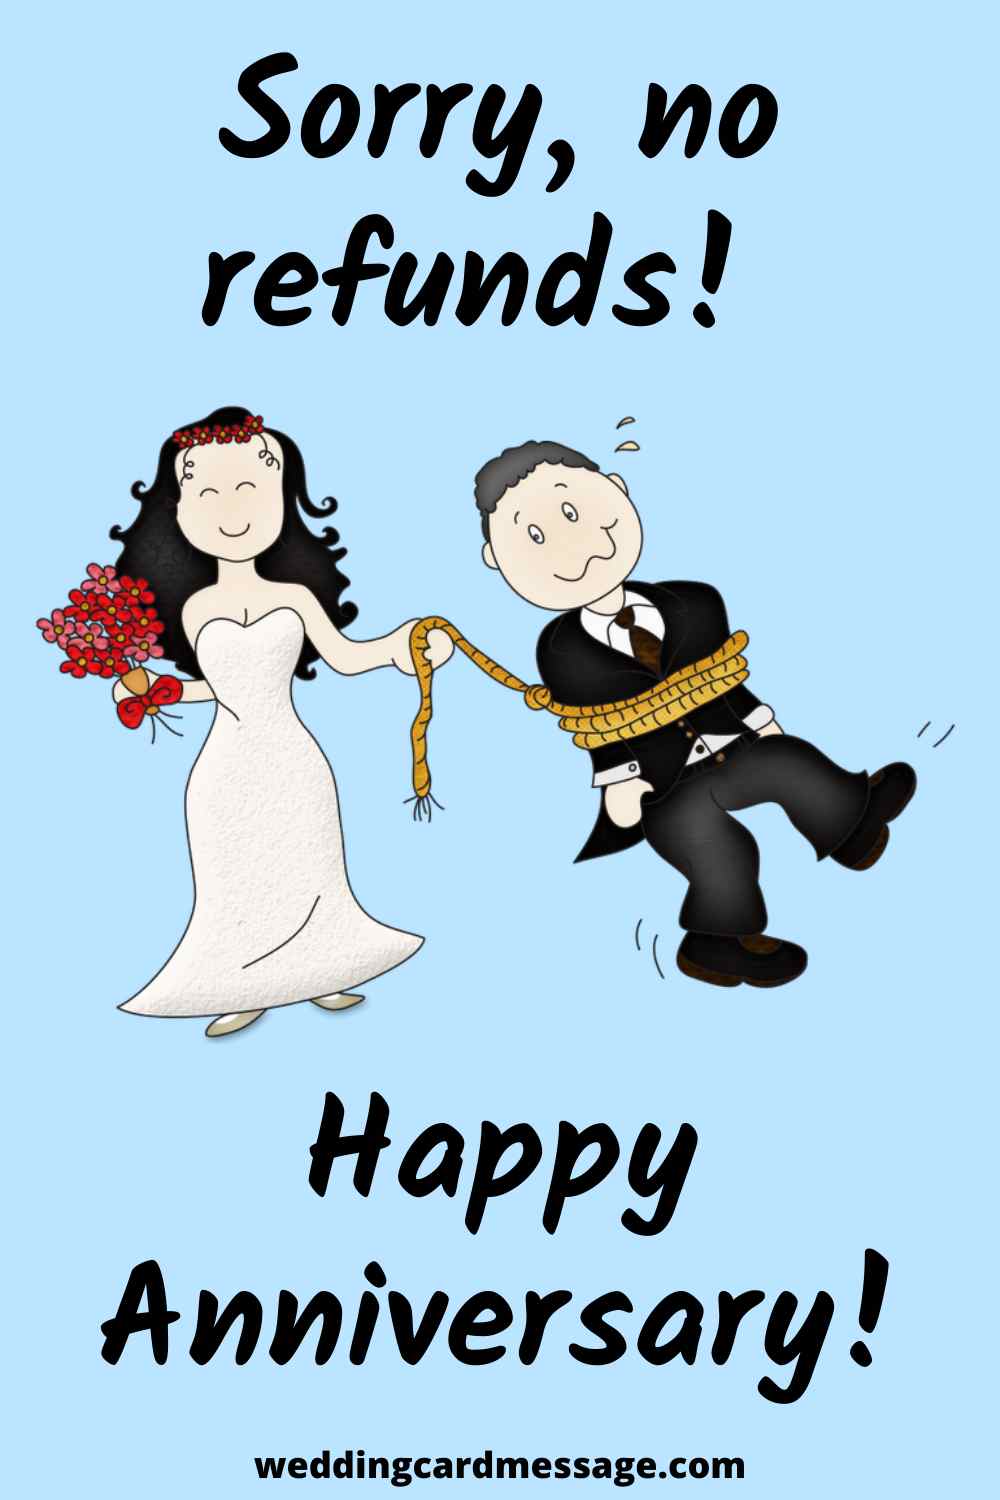 Funny Wedding Anniversary Quotes - Homecare24